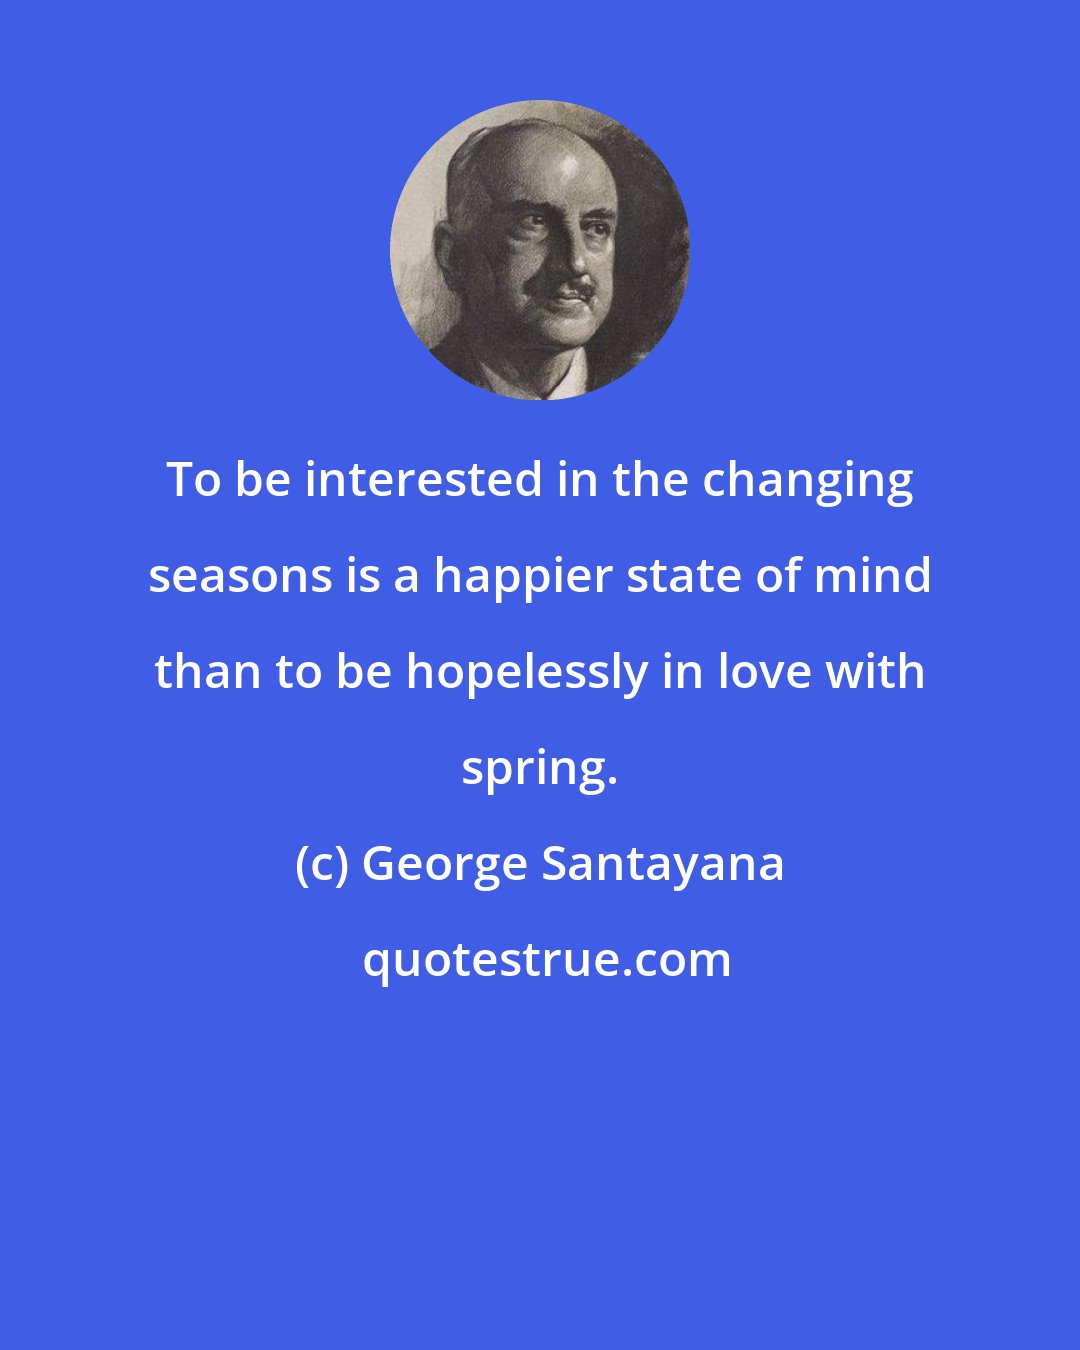 George Santayana: To be interested in the changing seasons is a happier state of mind than to be hopelessly in love with spring.